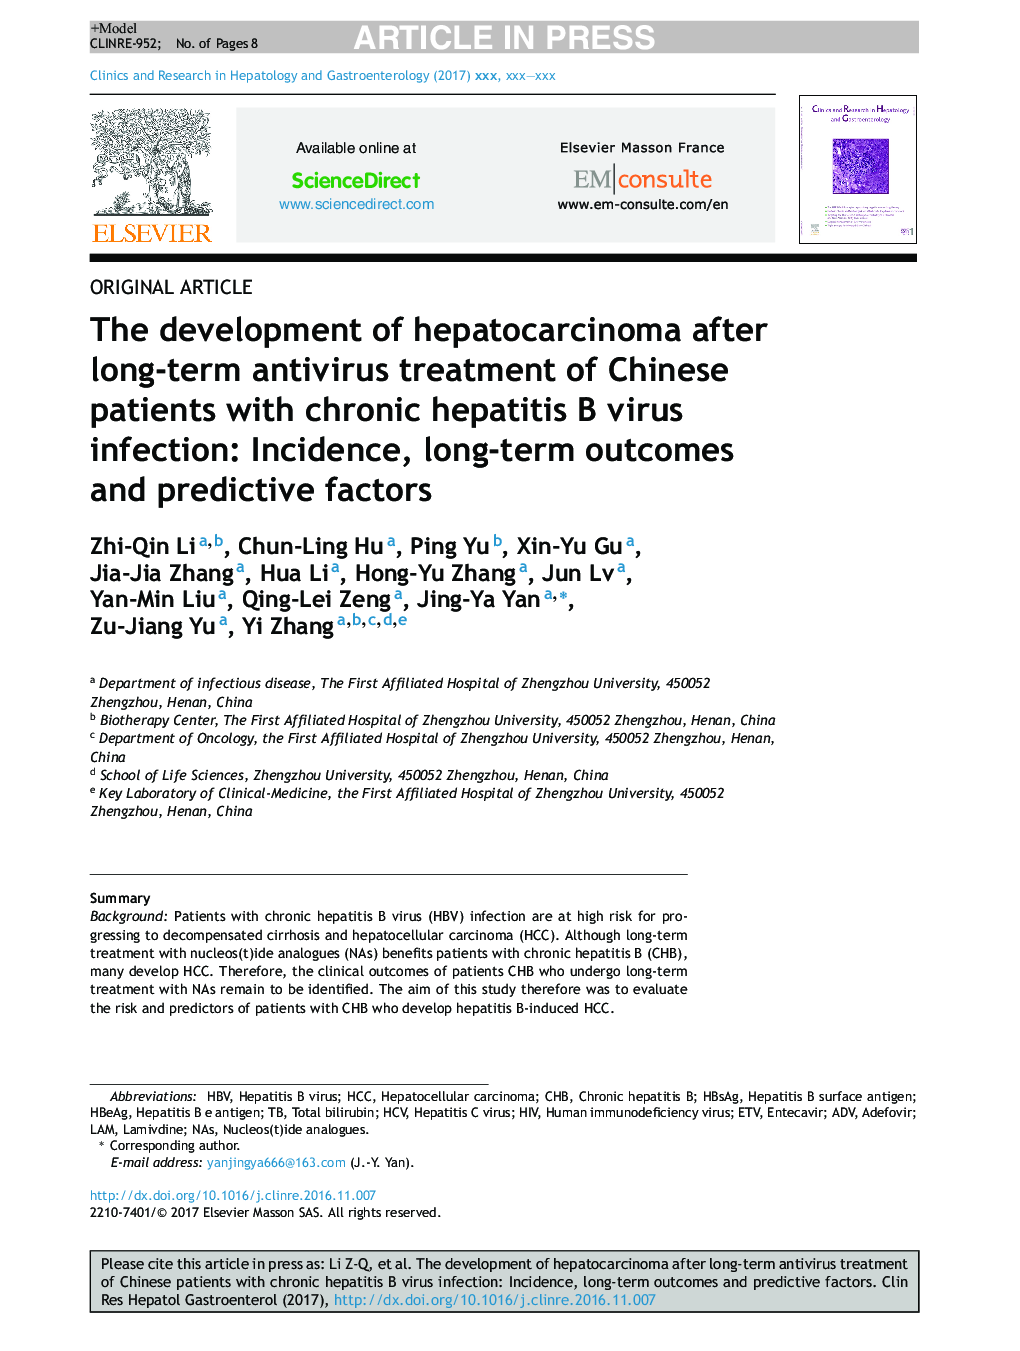 The development of hepatocarcinoma after long-term antivirus treatment of Chinese patients with chronic hepatitis B virus infection: Incidence, long-term outcomes and predictive factors